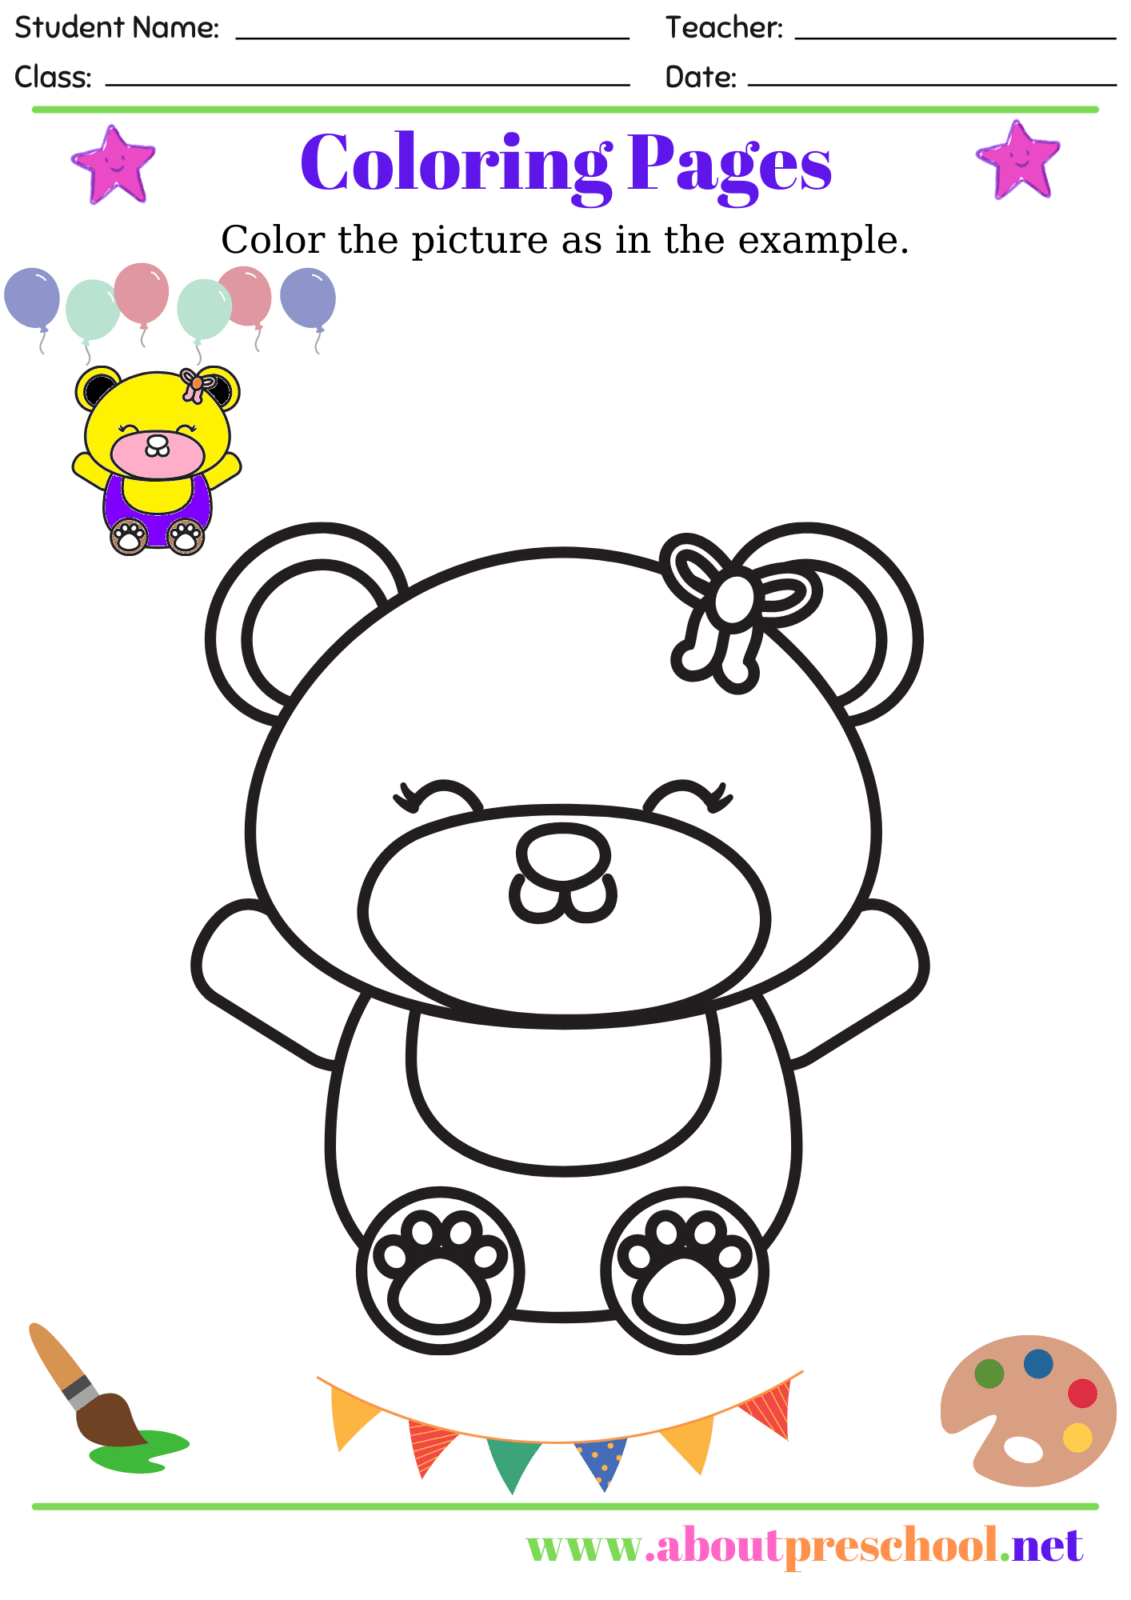 Coloring Pages-2